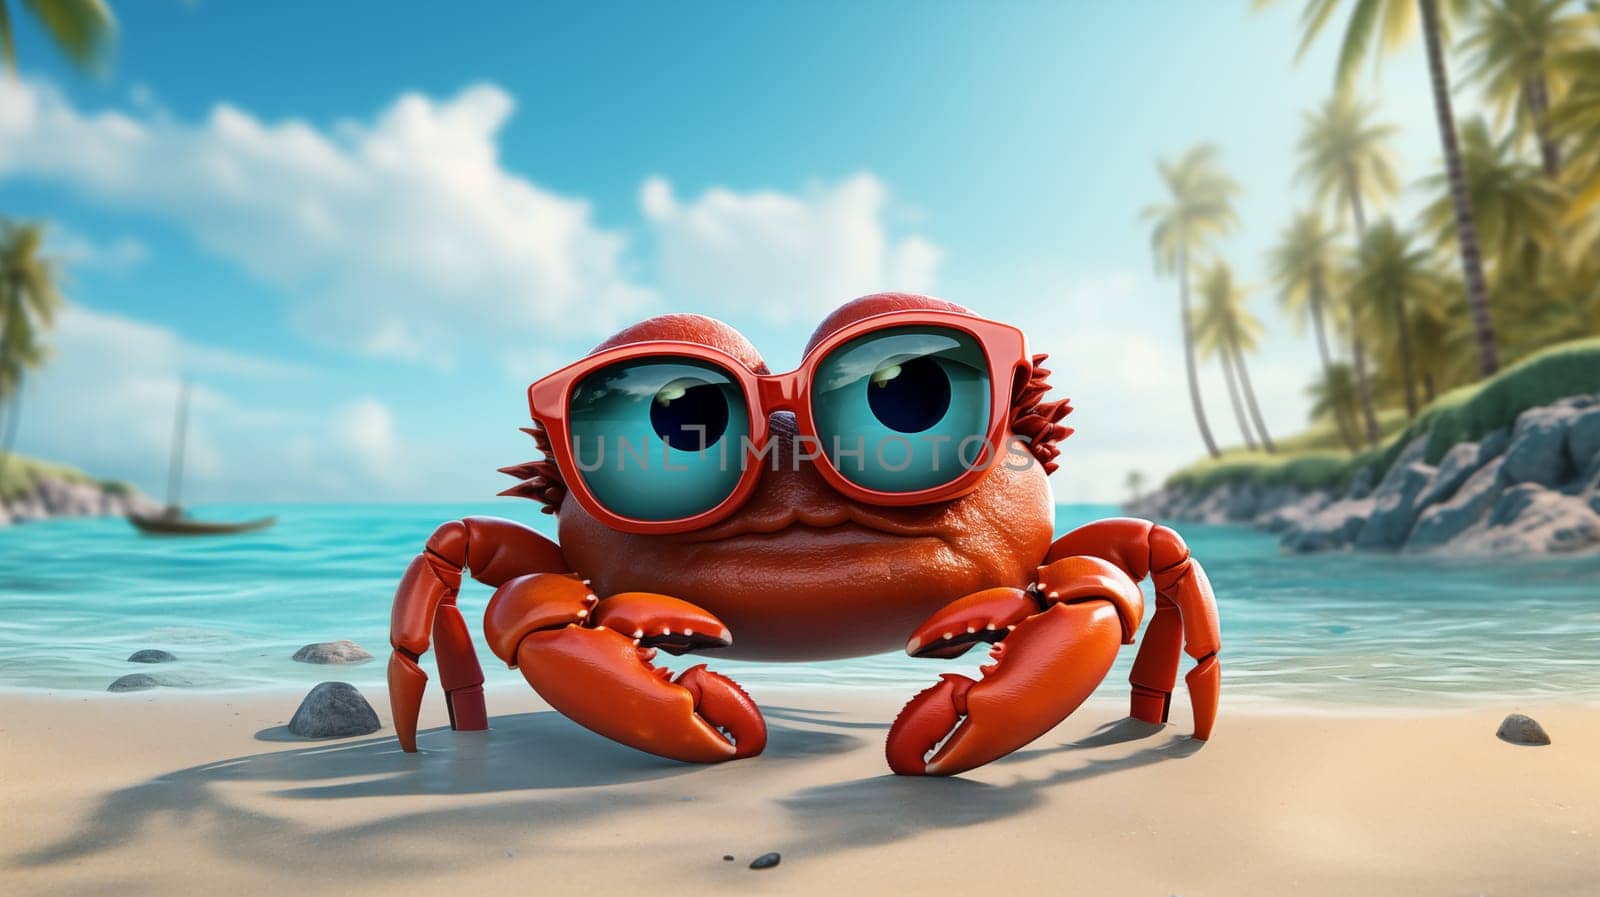 charming red cartoon crab with big expressive eyes donning oversized glasses on a sandy tropical beach.